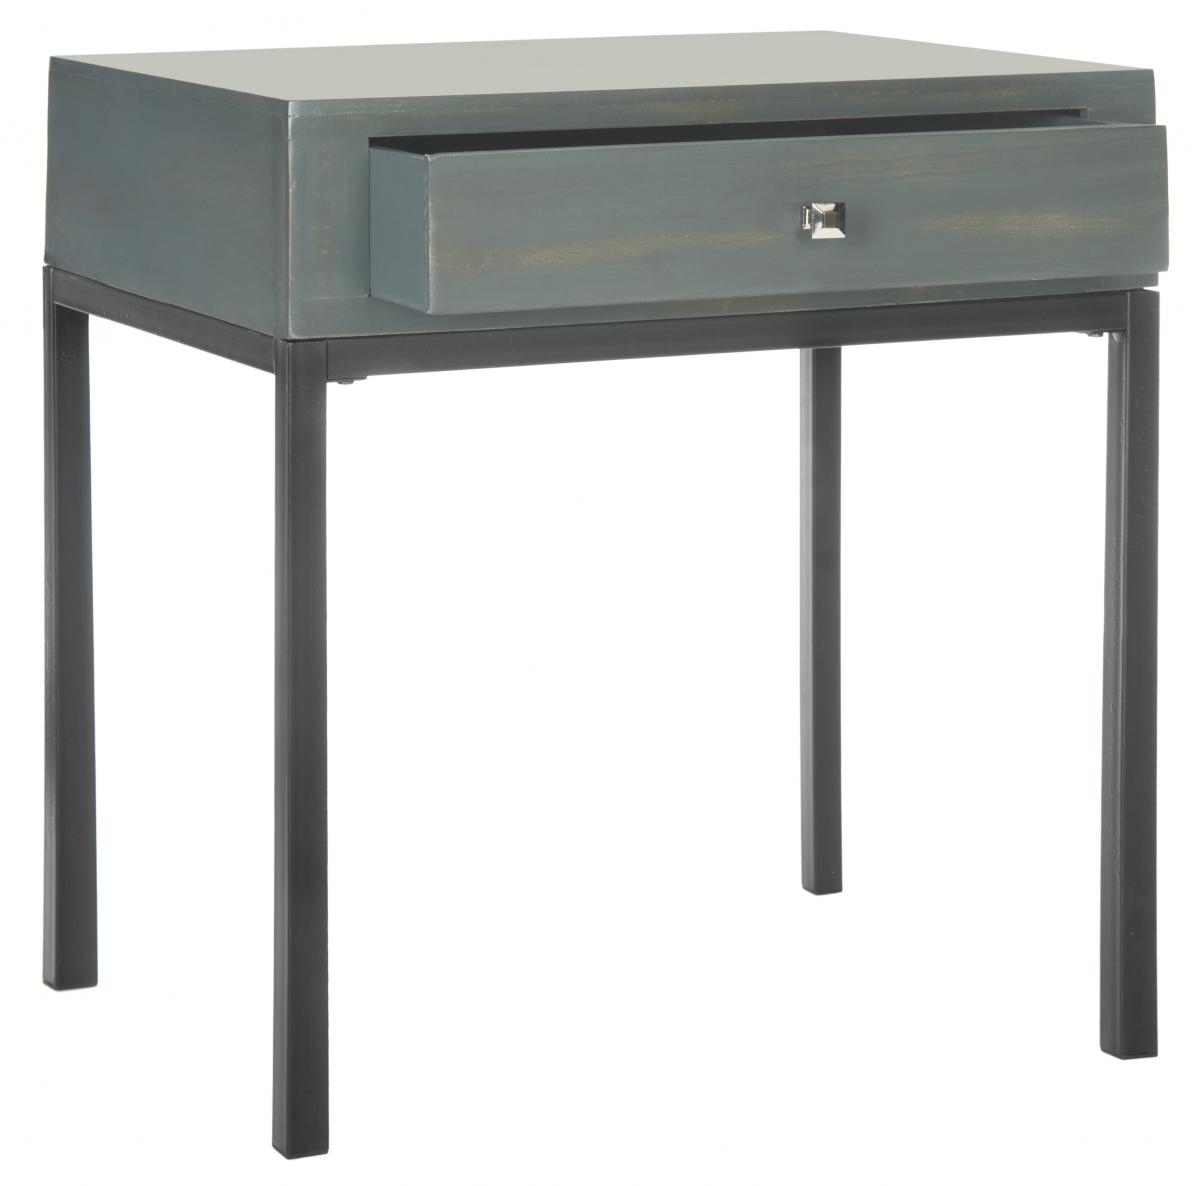 Adena End Table With Storage Drawer - Steel Teal - Arlo Home - Image 1